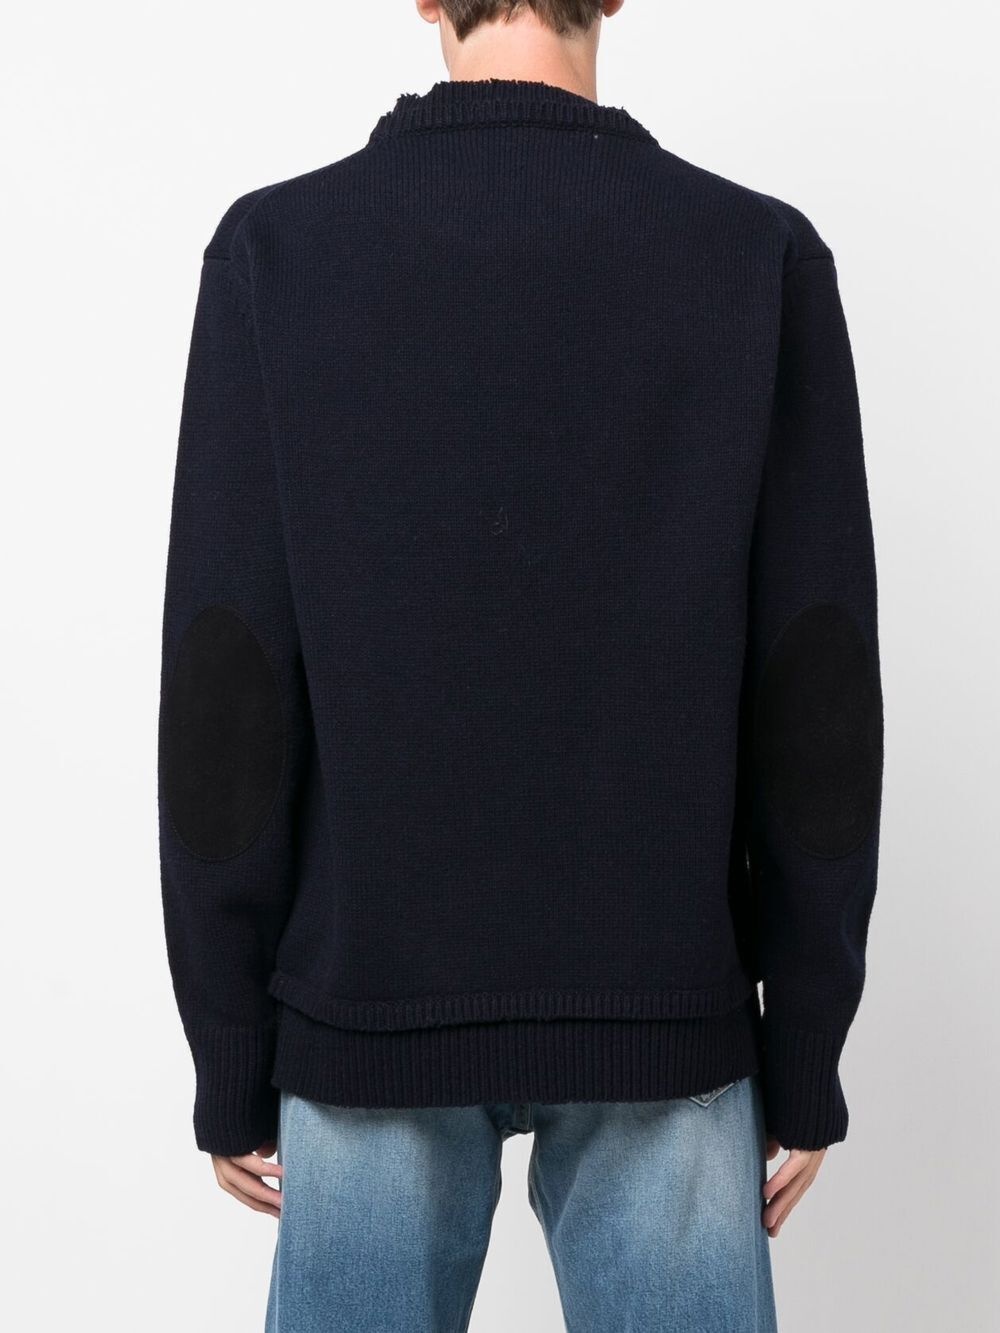 Elbow patch sweater - 4